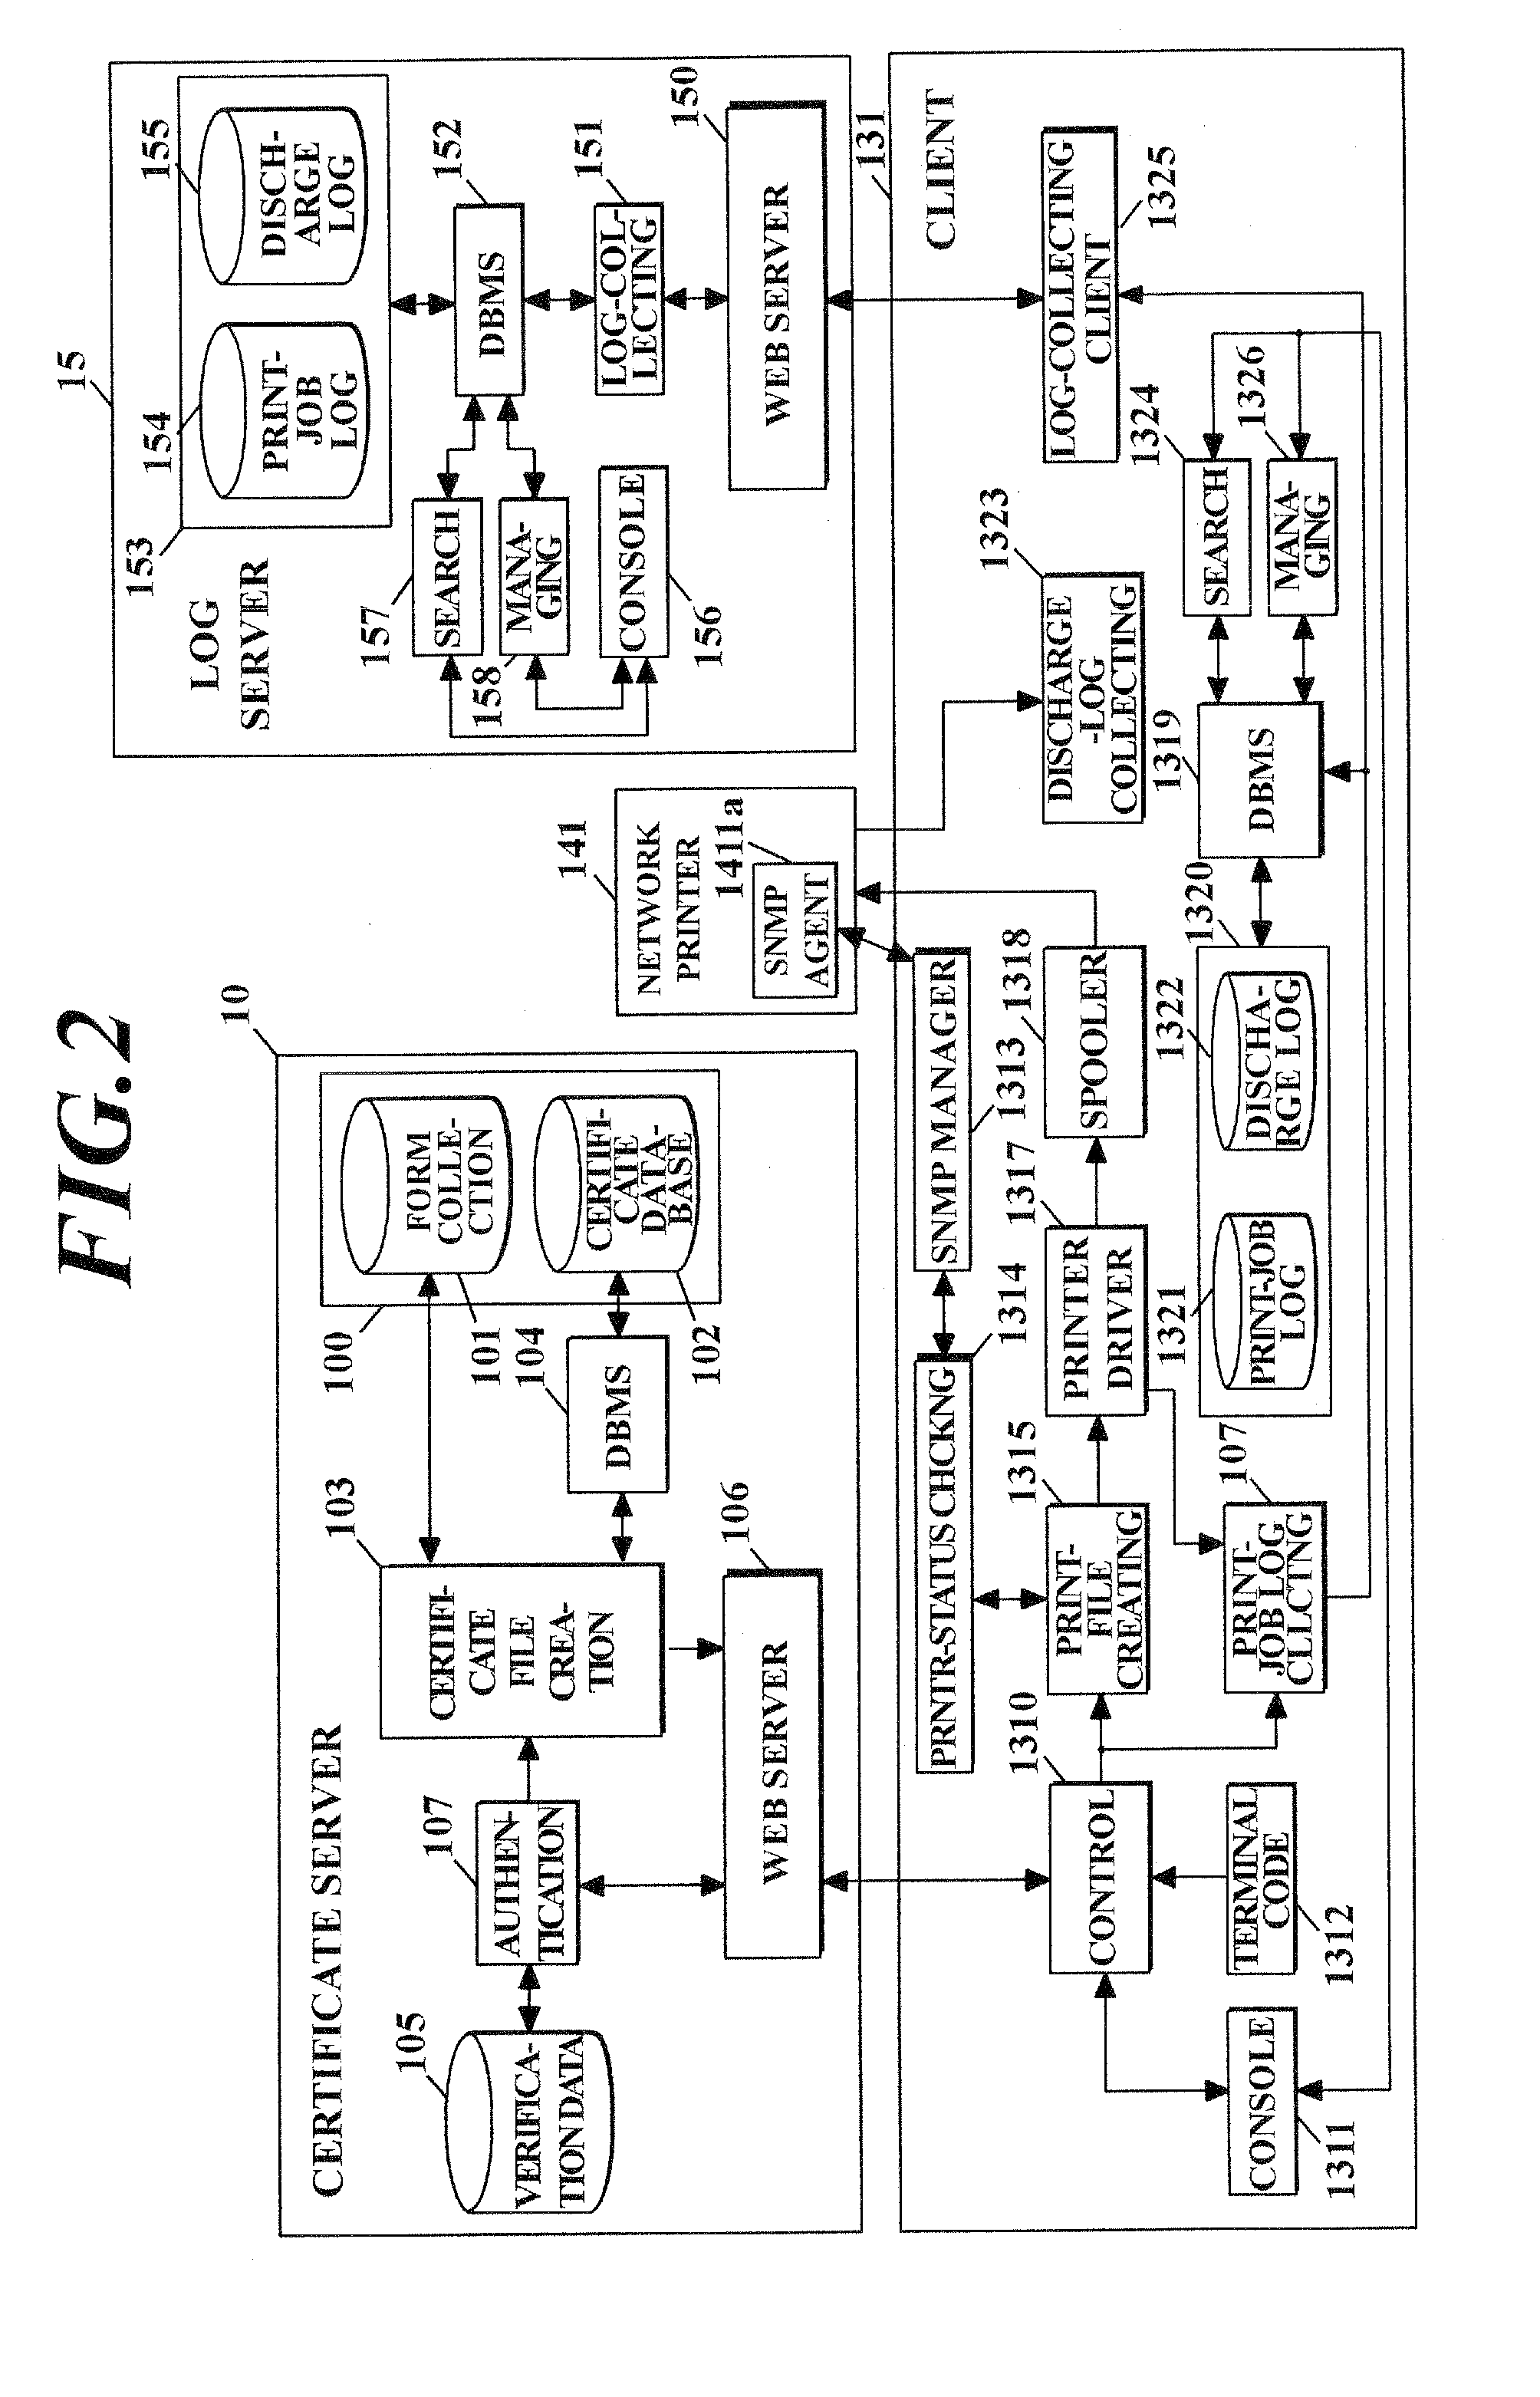 System and method for managing trace of certifications